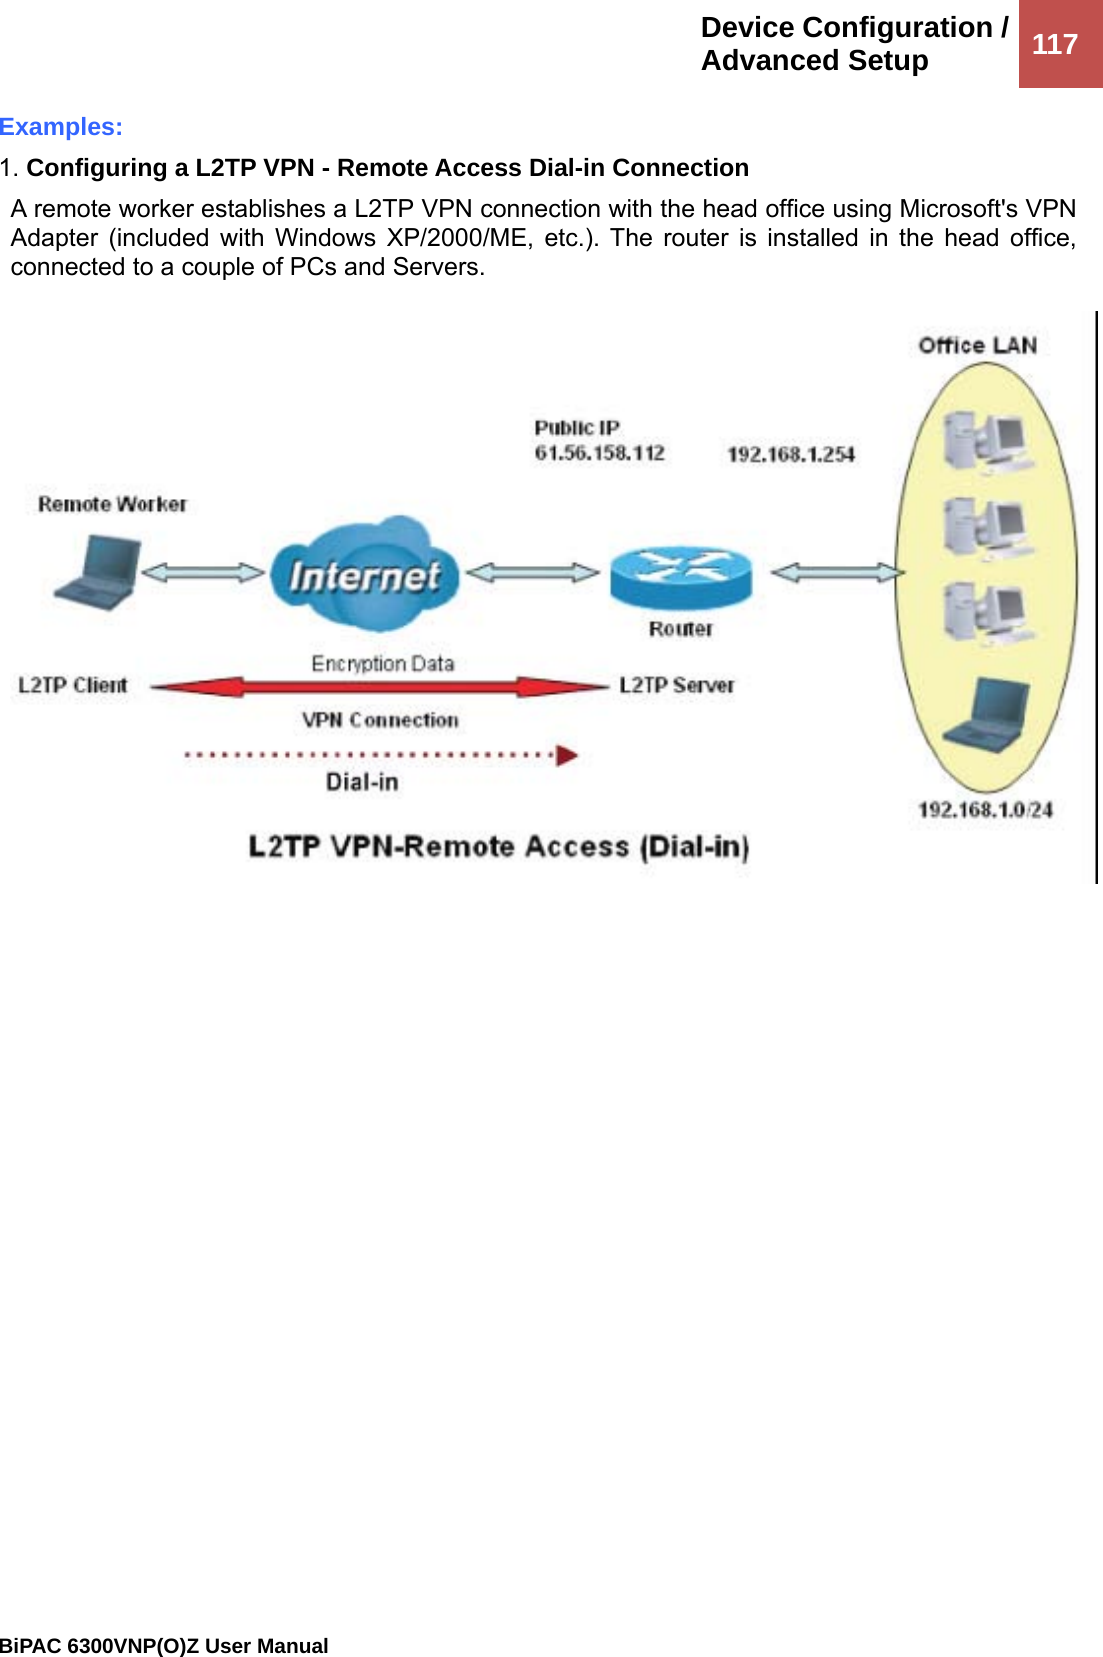 Device Configuration /Advanced Setup  117                                                BiPAC 6300VNP(O)Z User Manual  Examples: 1. Configuring a L2TP VPN - Remote Access Dial-in Connection A remote worker establishes a L2TP VPN connection with the head office using Microsoft&apos;s VPN Adapter (included with Windows XP/2000/ME, etc.). The router is installed in the head office, connected to a couple of PCs and Servers.   